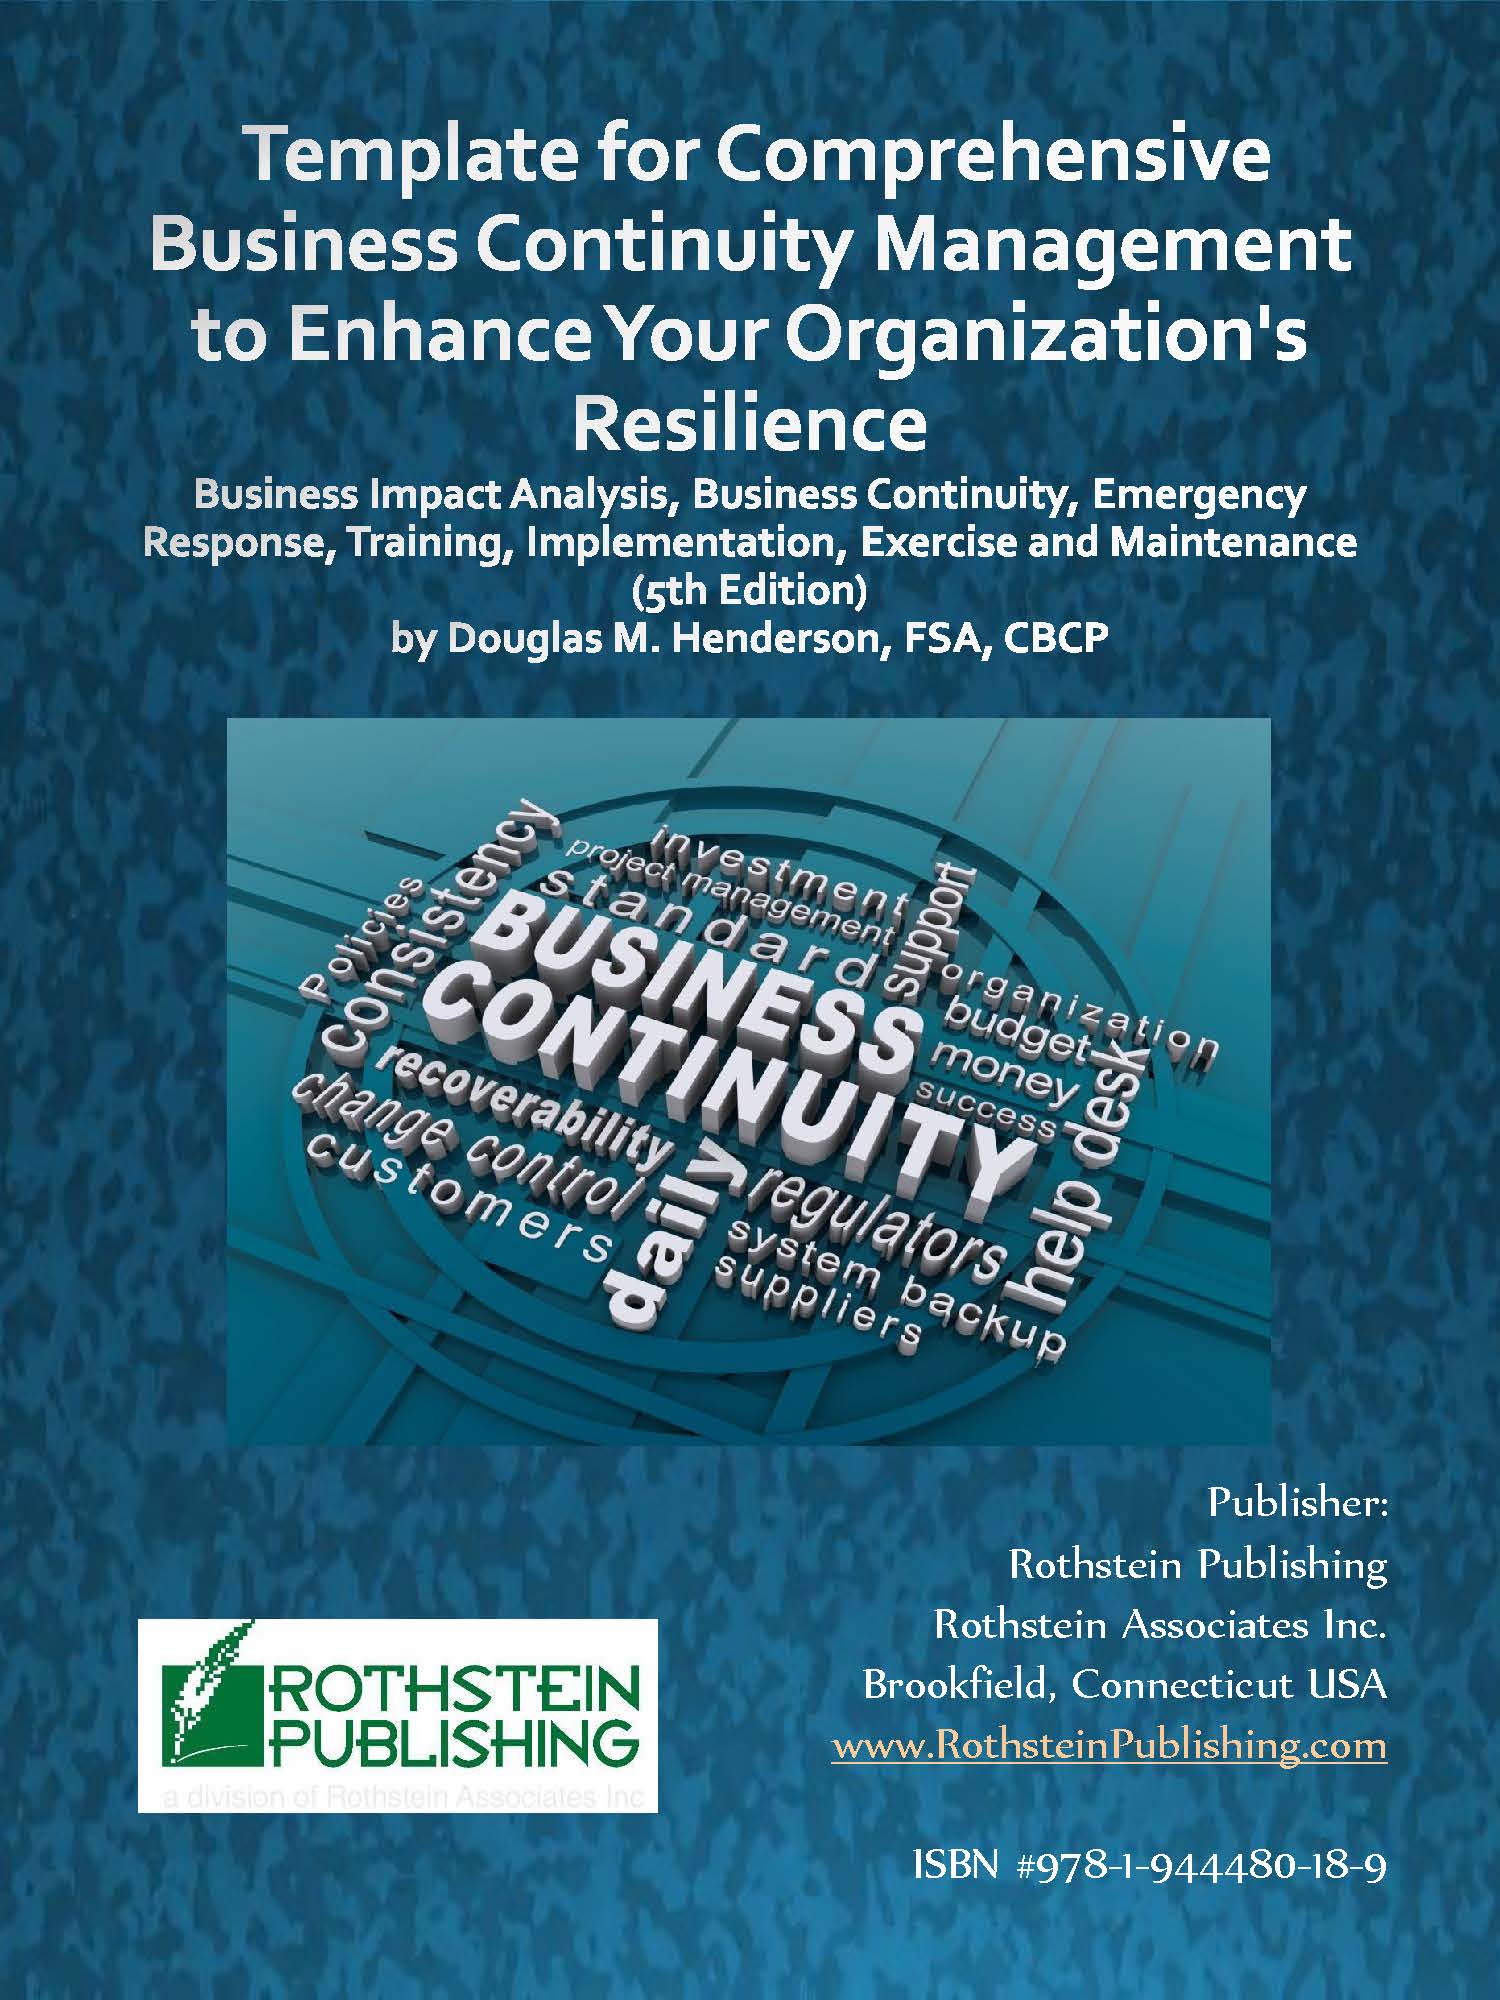 template-for-comprehensive-business-continuity-management-to-enhance-your-organizations-resilience-rothstein-publishing